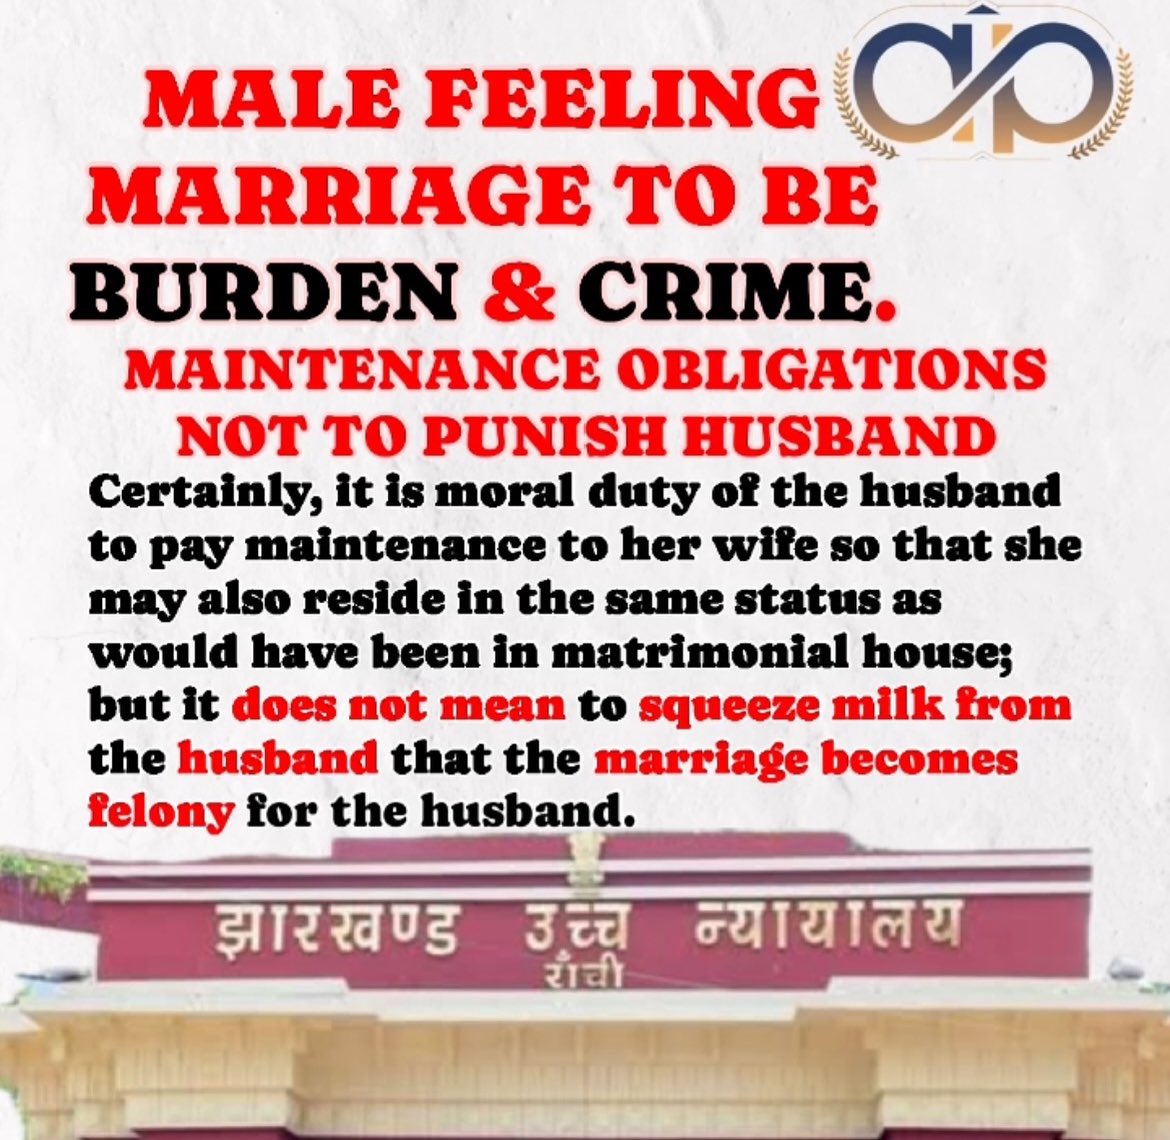 CrA.535/2002 pc/ap.laws

Is it moral duty or legal duty if husband? If it’s moral duty can courts define what’s the moral duty of wives too or feminists constitution won’t let them give any guidelines for wife’s responsibility in a marital relationship? 

#FeminismoEsCáncer